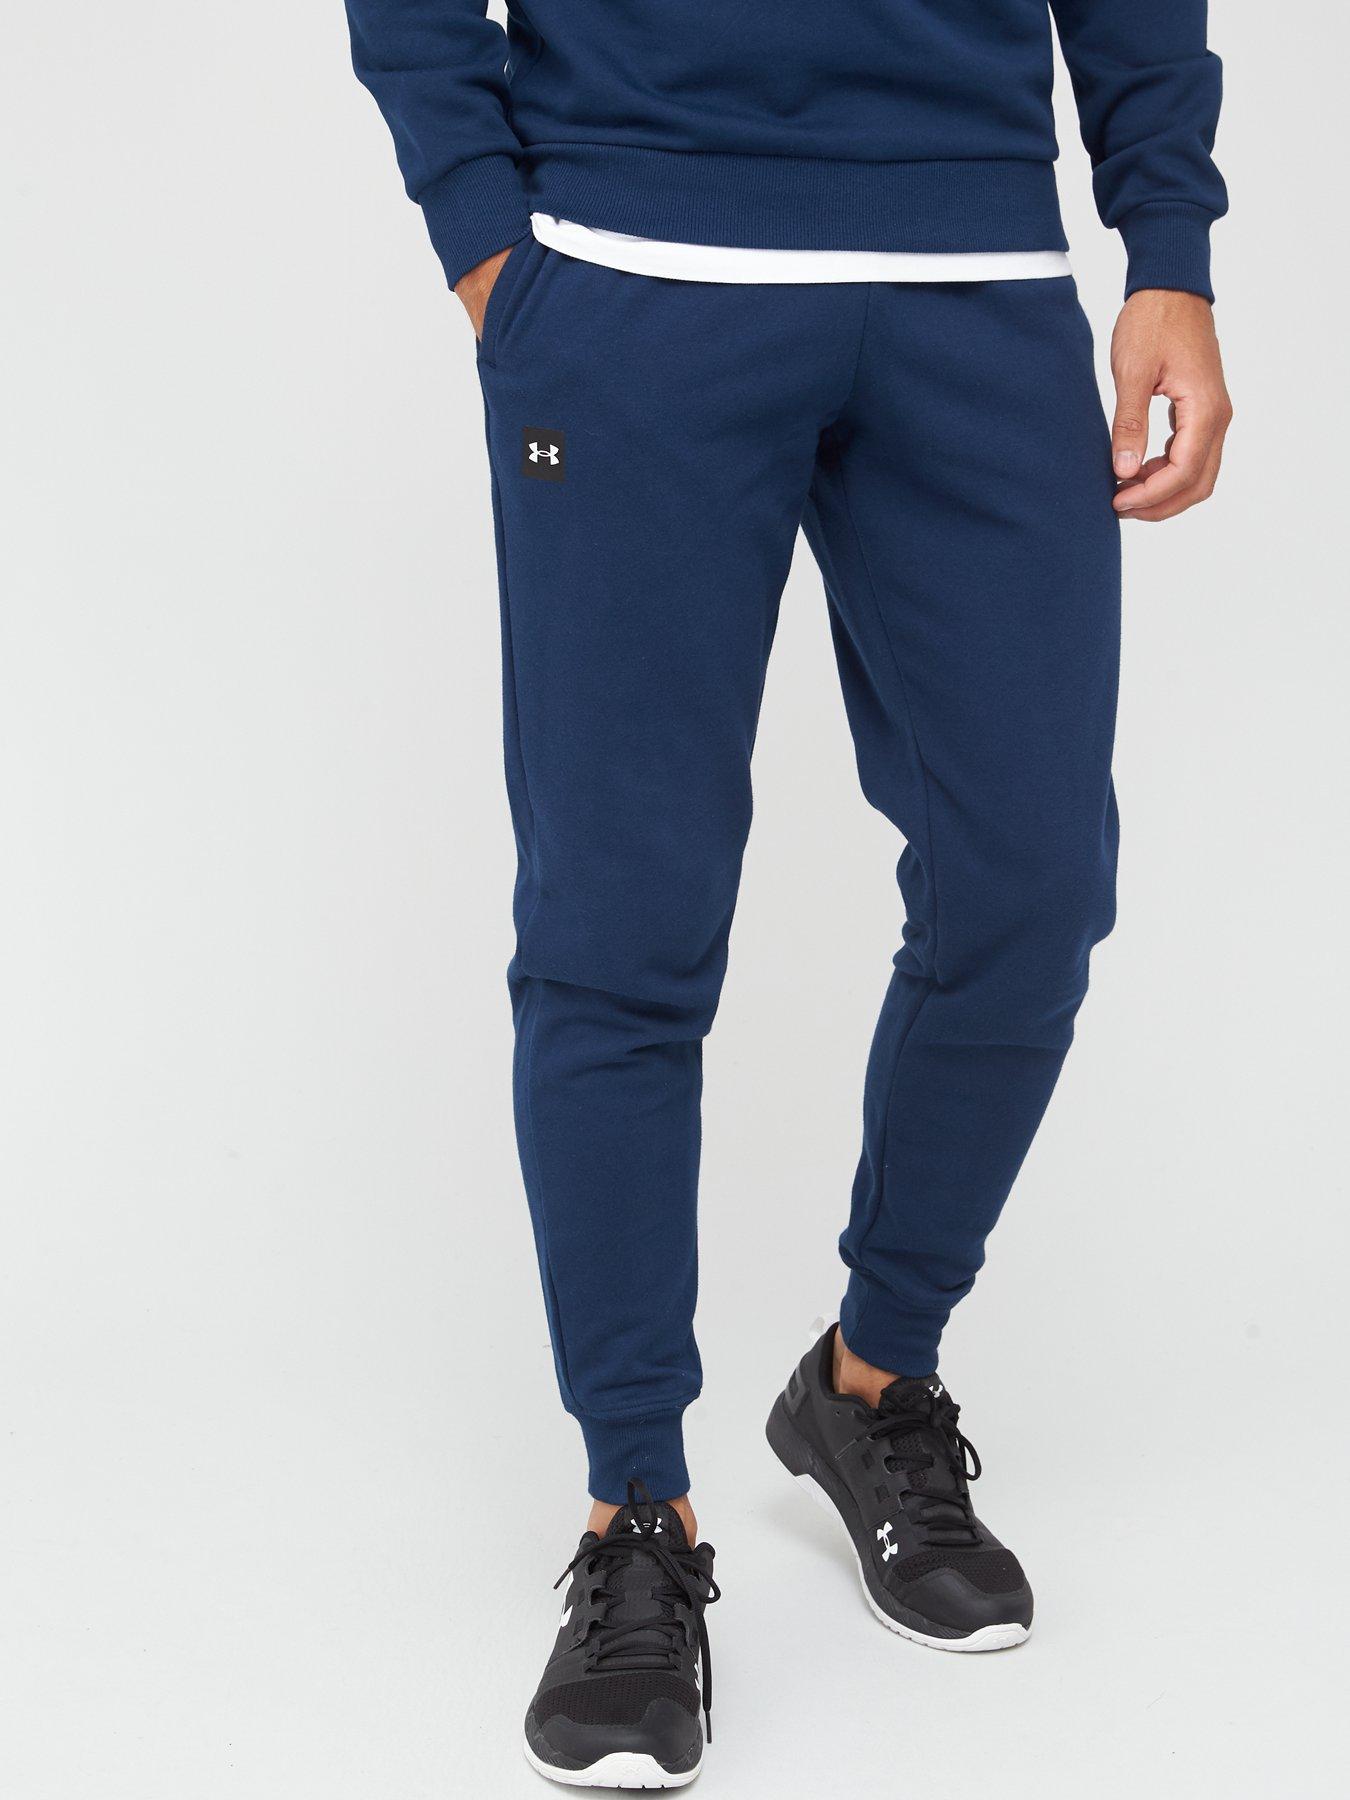 Tracksuit Bottoms Tracksuits Men | www.very.co.uk